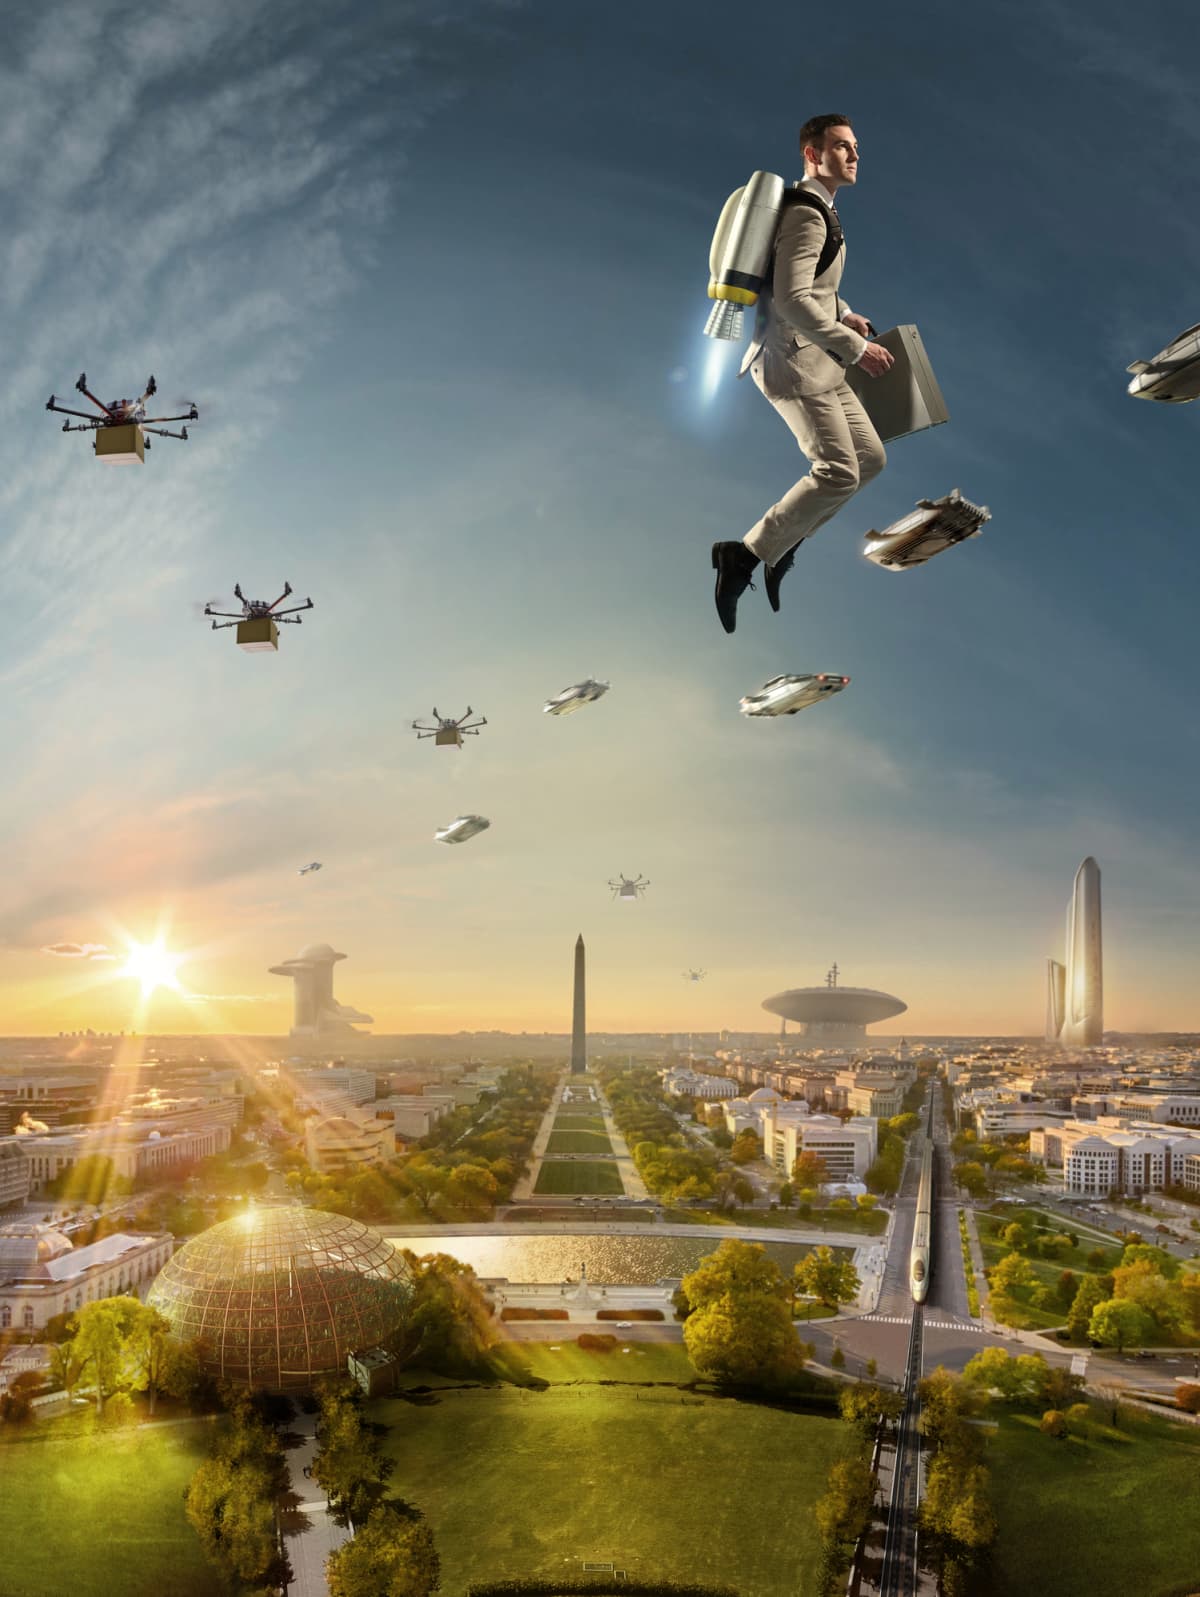 A man with a rocket jet pack floats above a futuristic version of Washington D.C.